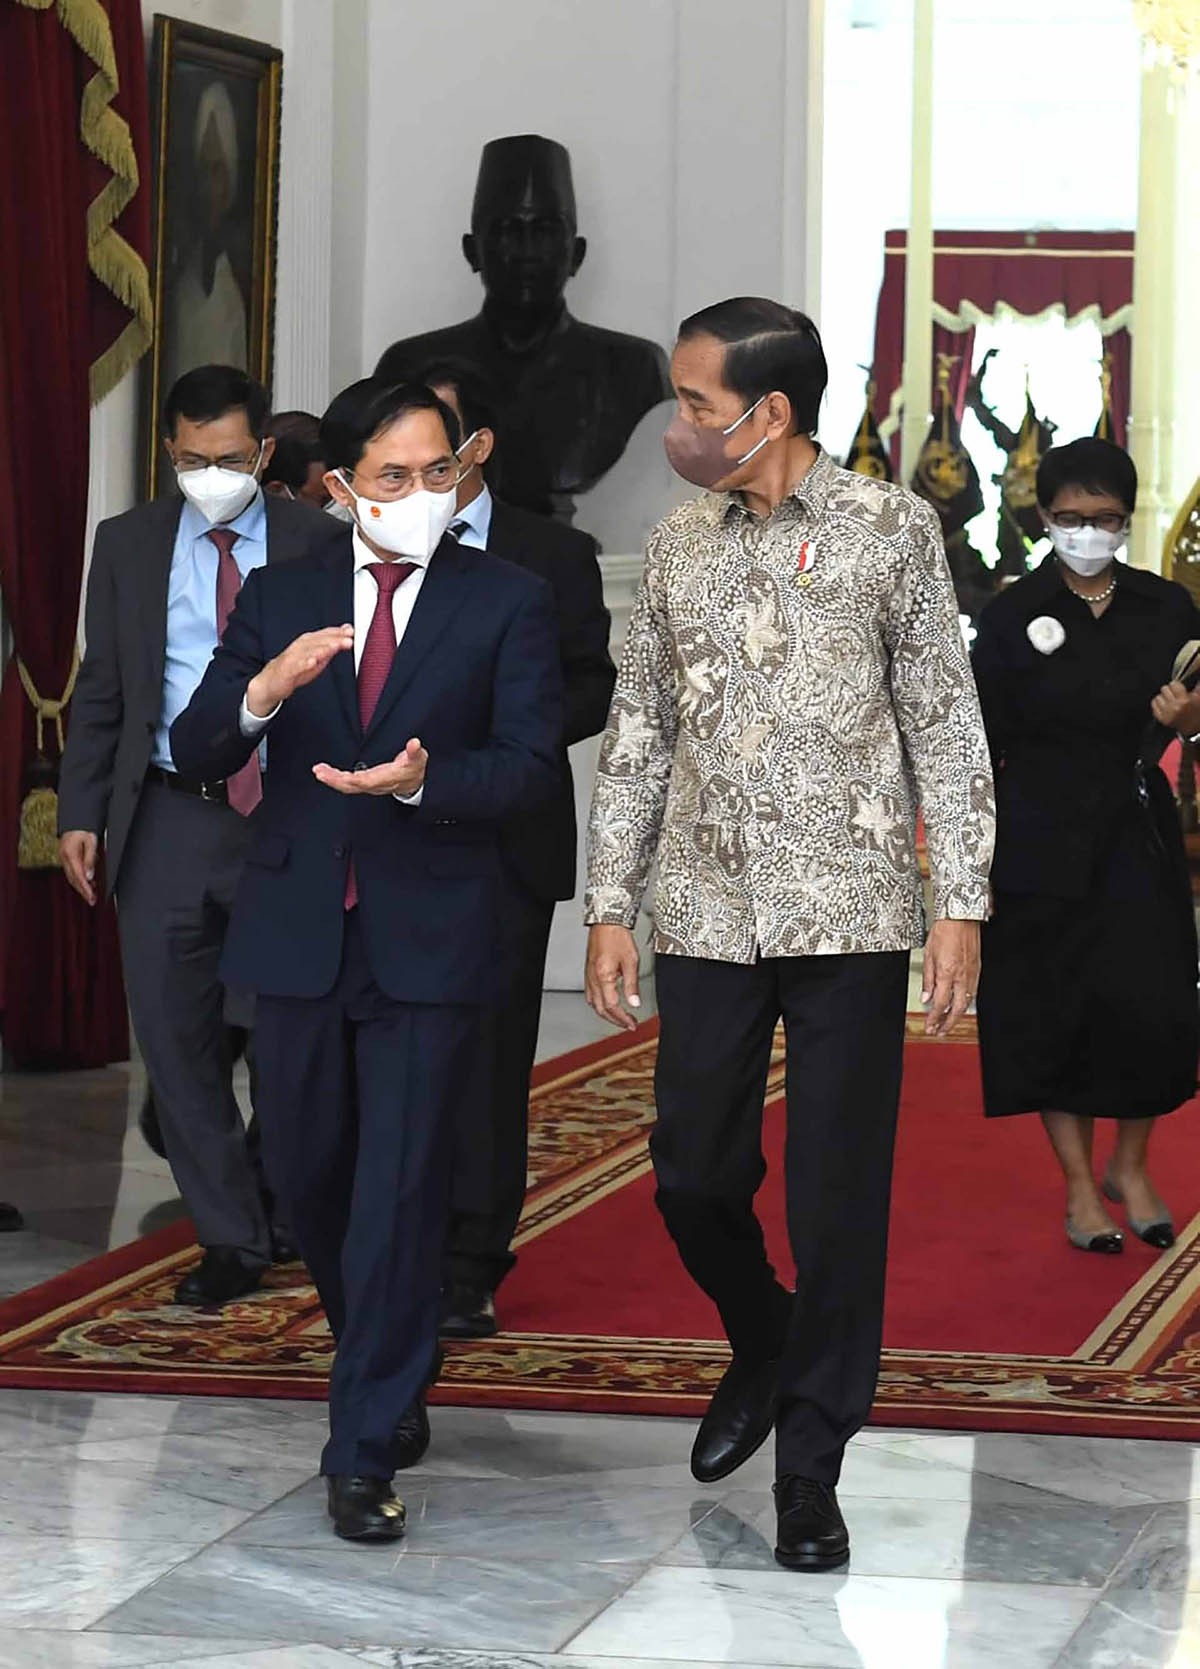 Indonesia and Viet Nam relations: True partners for development